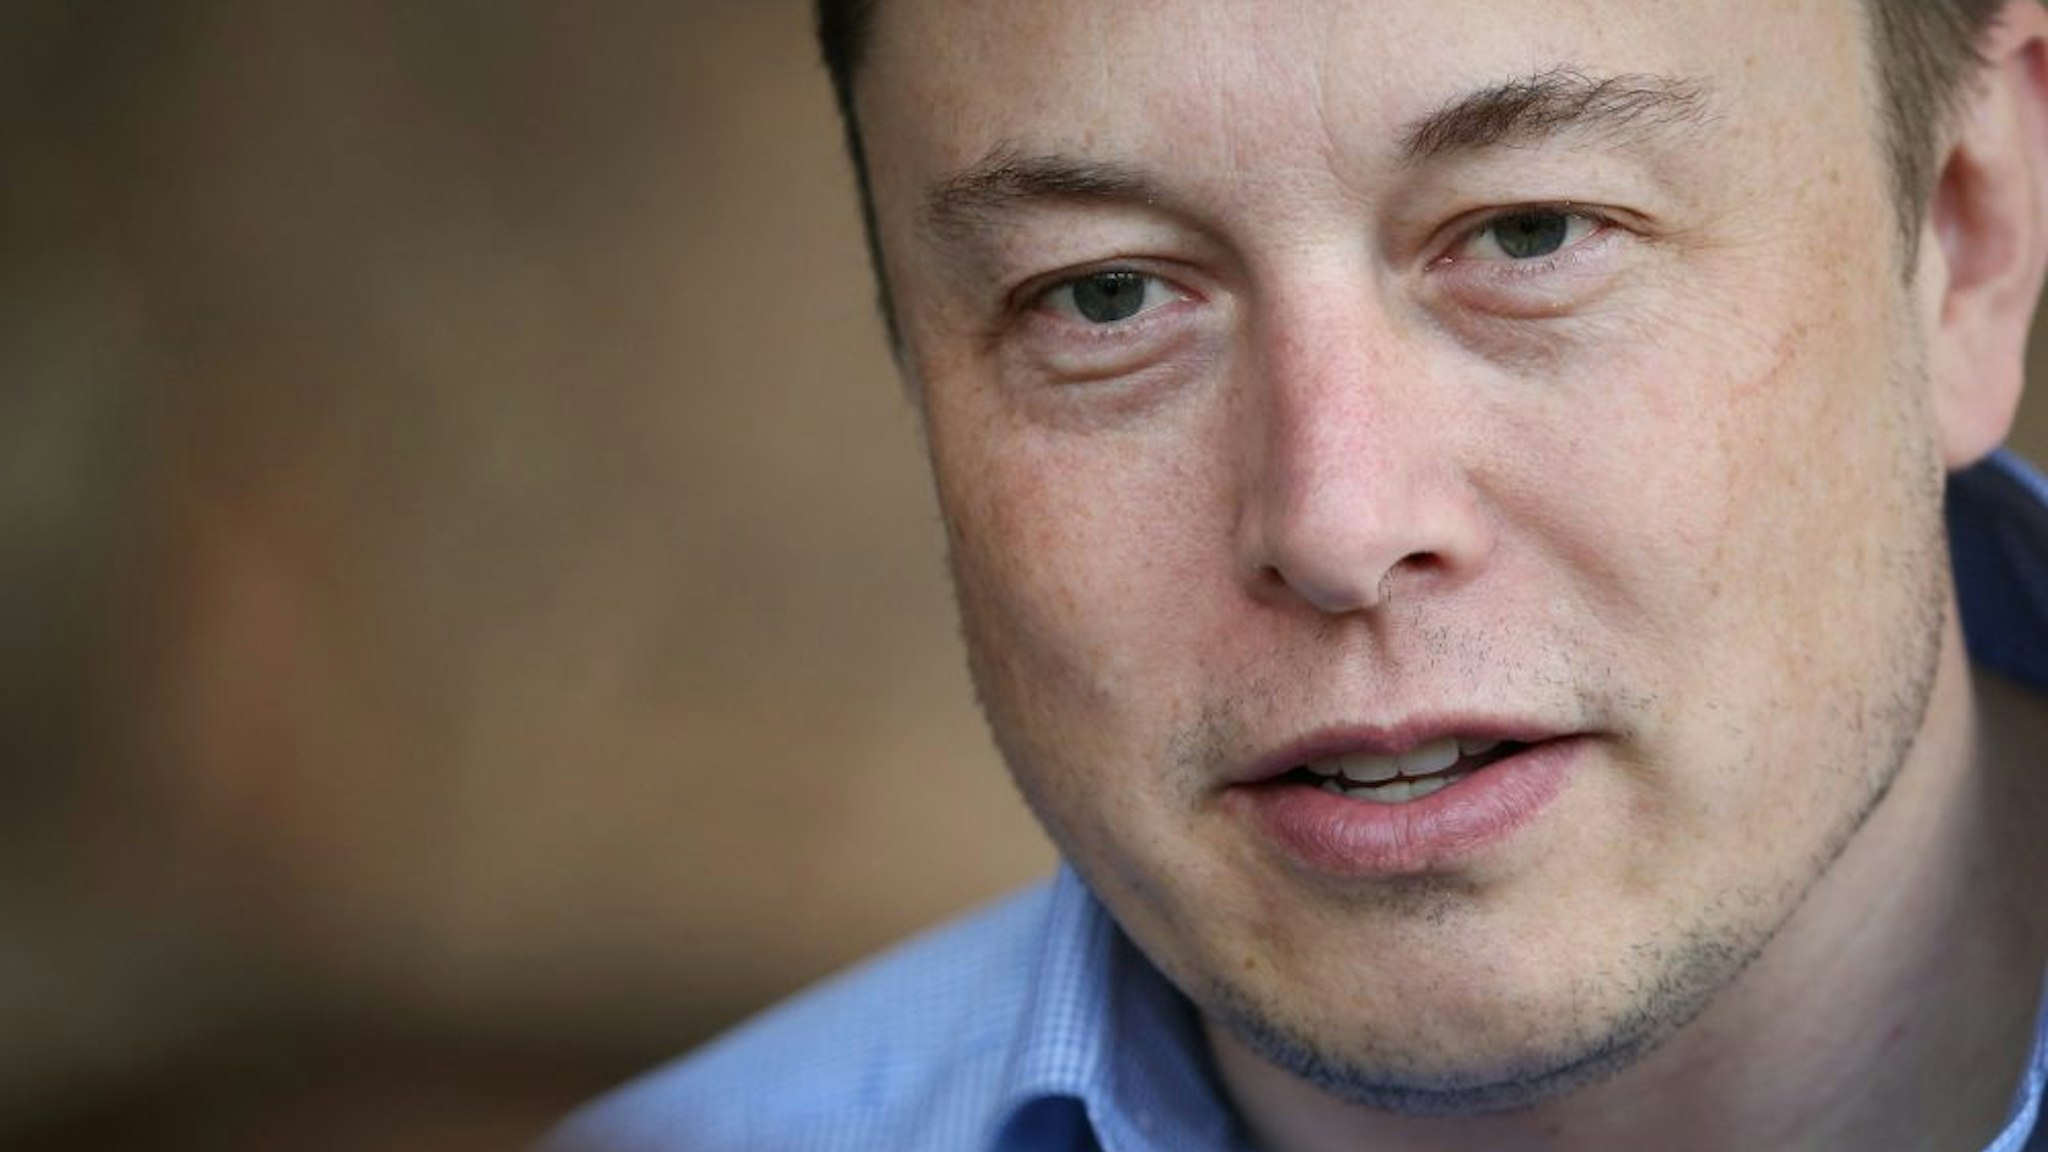 SUN VALLEY, ID - JULY 07: Elon Musk, CEO and CTO of SpaceX, CEO and product architect of Tesla Motors, and chairman of SolarCity, attends the Allen &amp; Company Sun Valley Conference on July 7, 2015 in Sun Valley, Idaho. Many of the worlds wealthiest and most powerful business people from media, finance, and technology attend the annual week-long conference which is in its 33nd year.